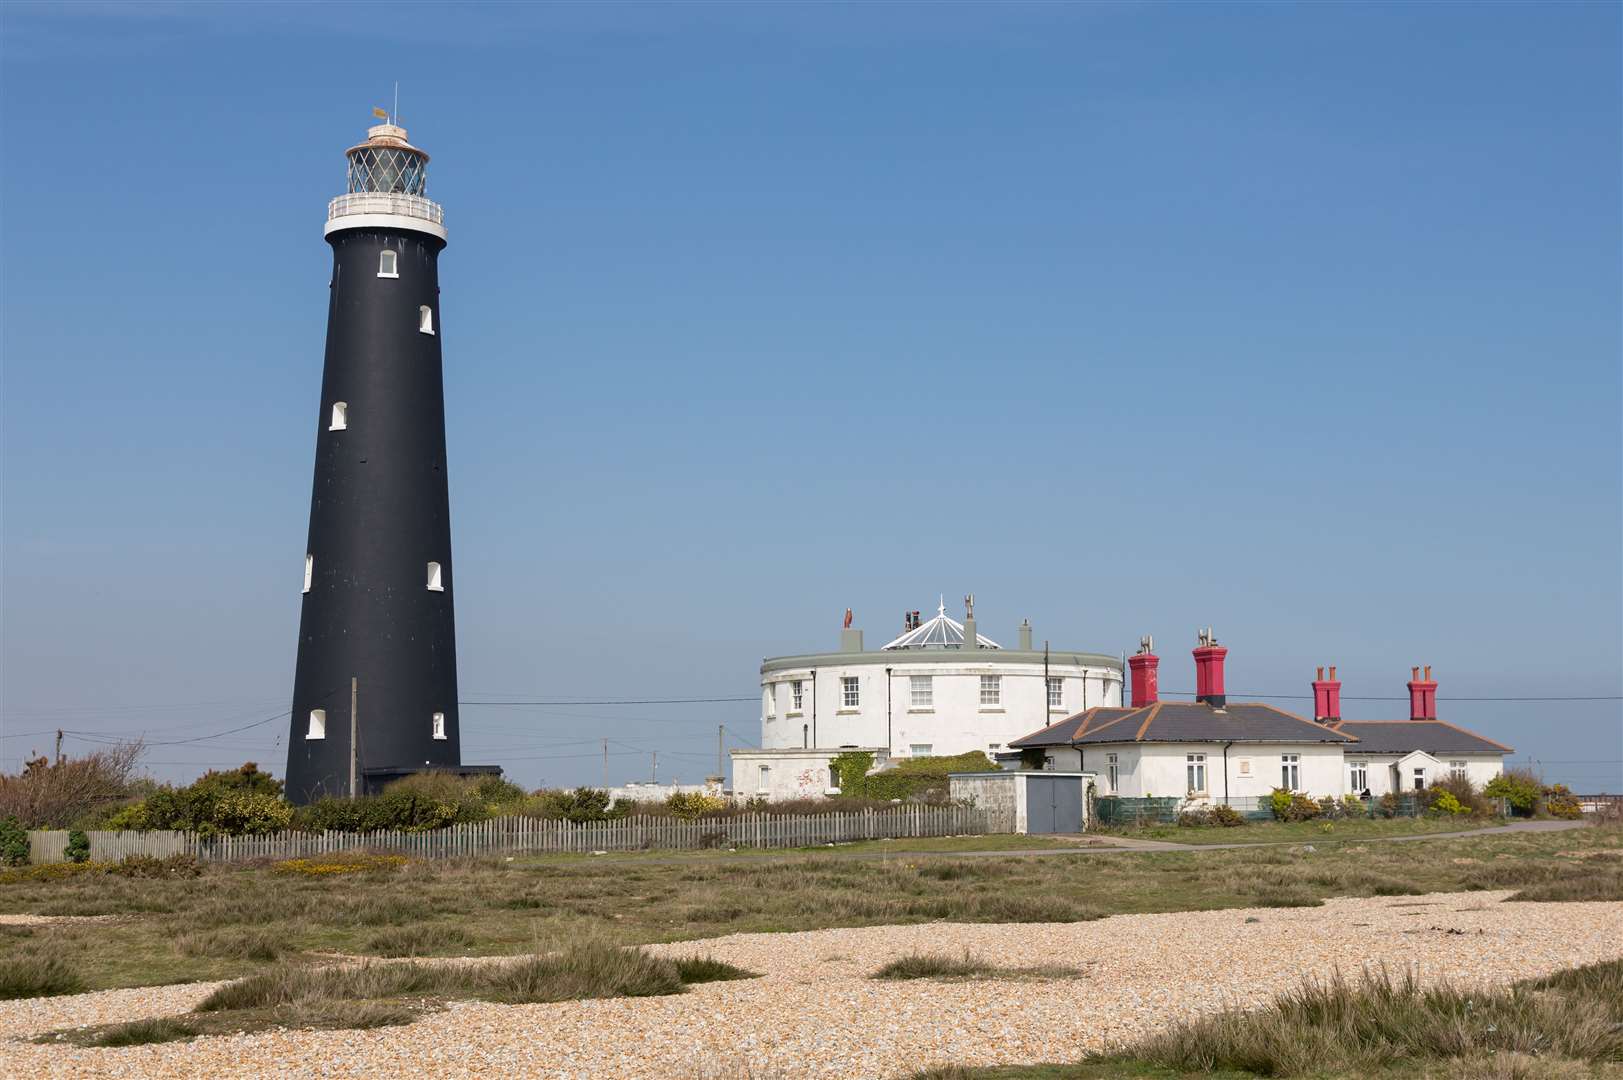 Dungeness was linked to France by an undersea oil pipeline